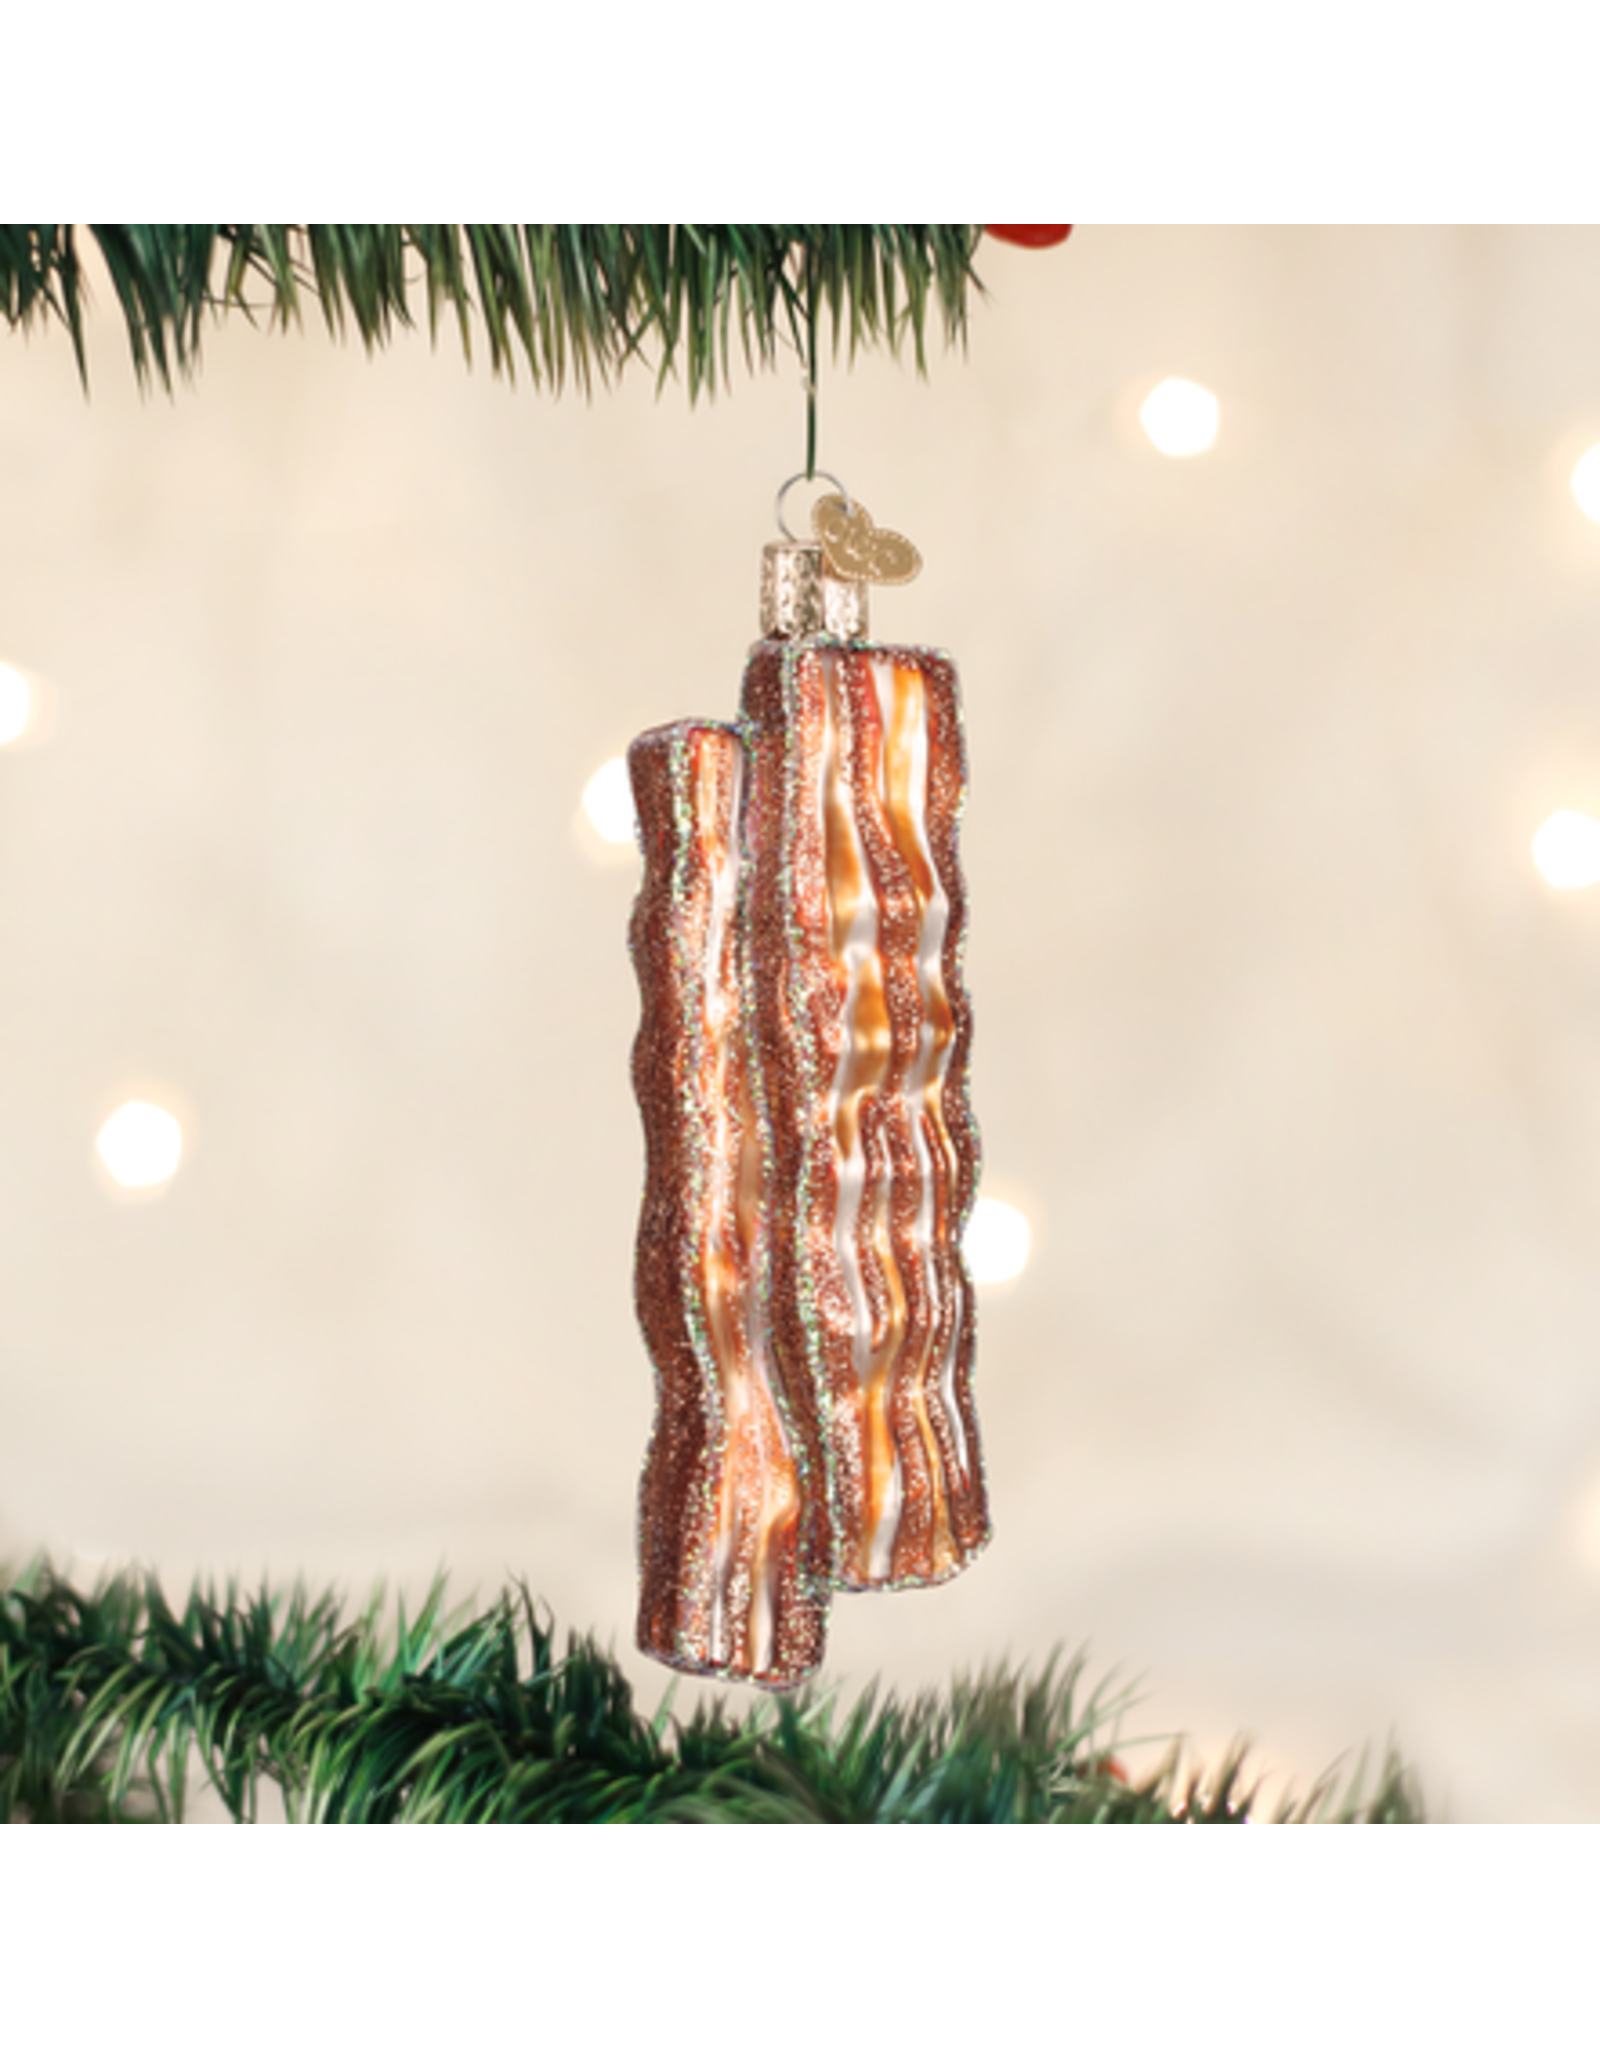 Old World Christmas Bacon Strips Ornament